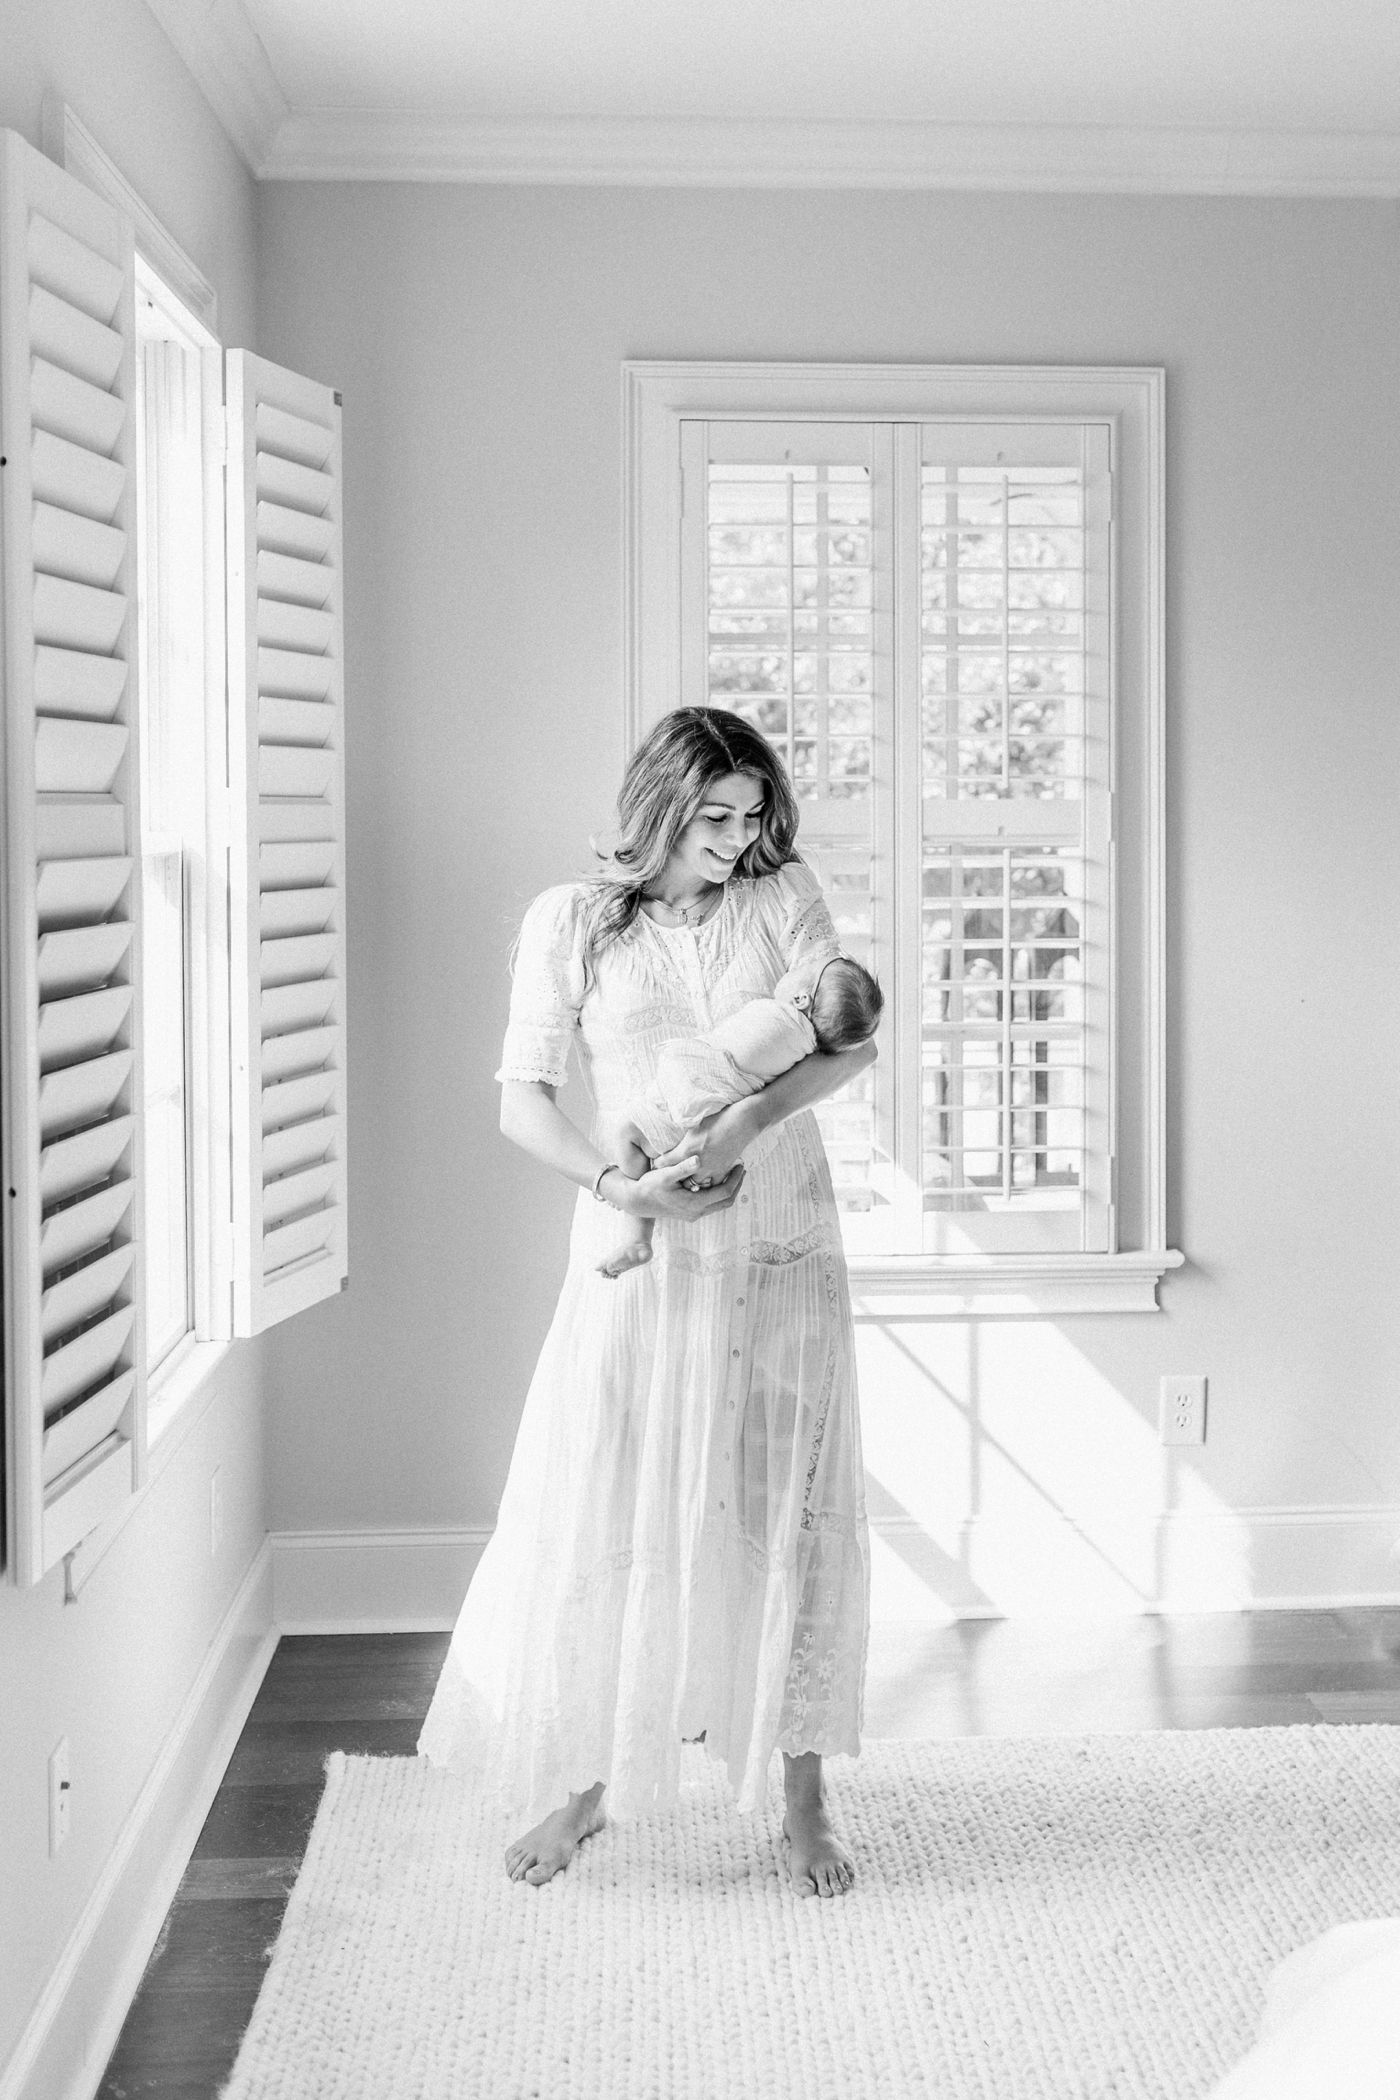 Black and white image of Mom rocking baby girl while window light shines on them. Photo by Mount Pleasant newborn photographer, Caitlyn Motycka Photography.